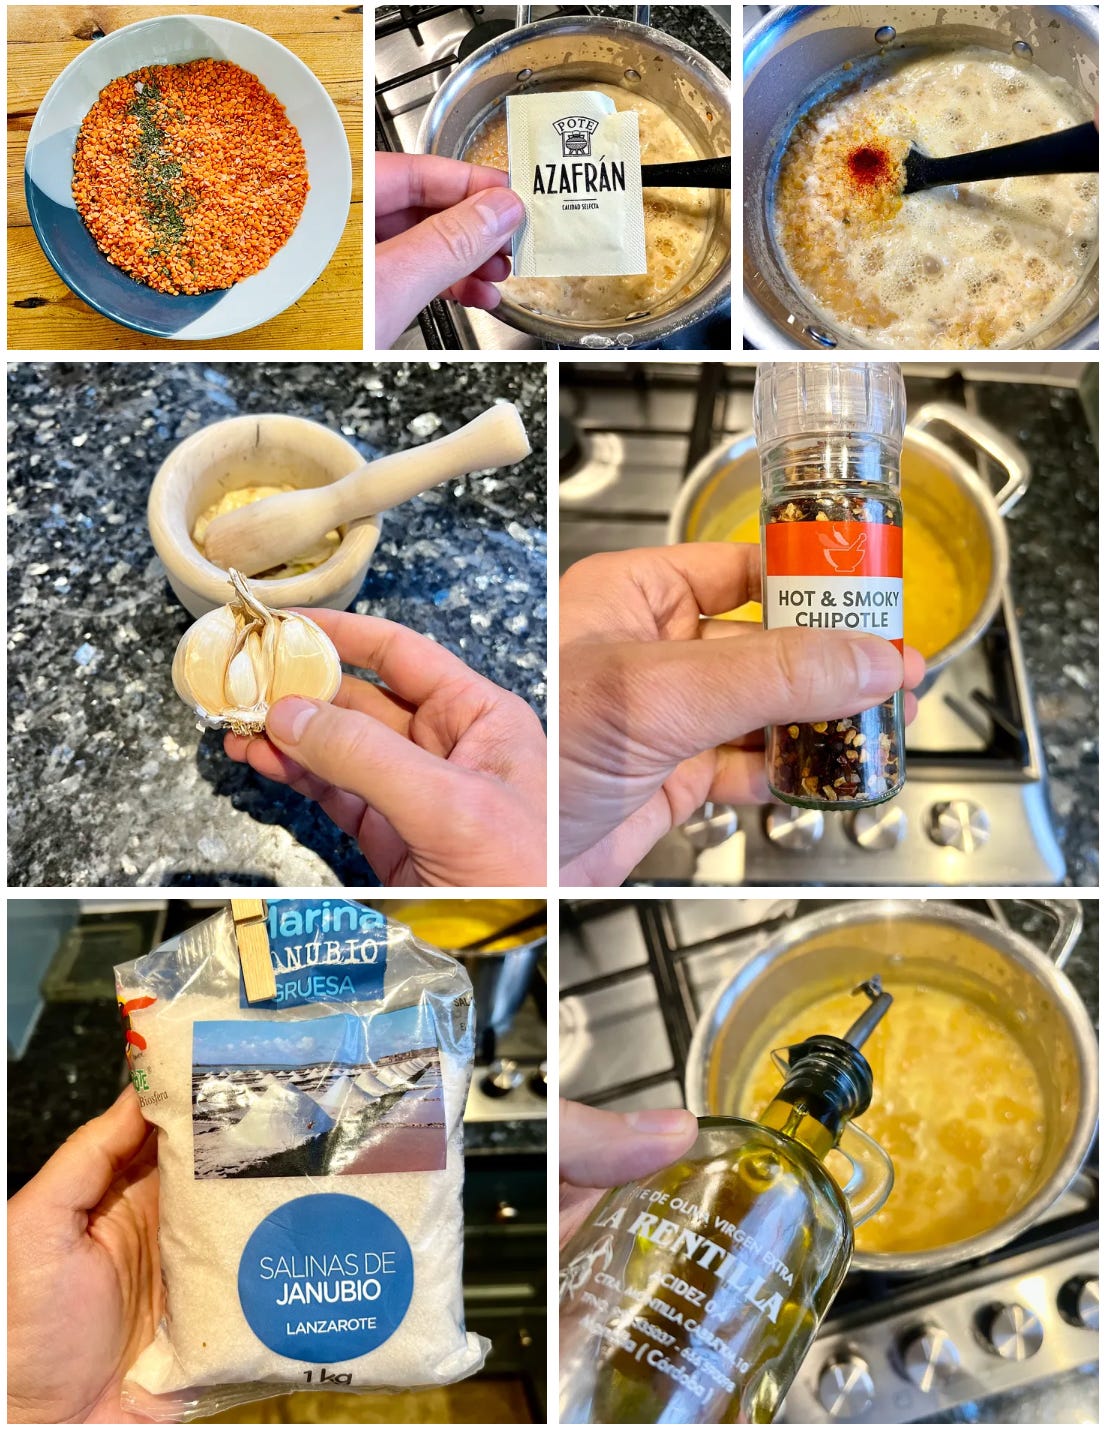 A cooking process montage showing the preparation of a lentil dish: mixed red lentils in a bowl, saffron infusion into a pot, crushed garlic in a mortar, chipotle spice being added, and sea salt from Salinas de Janubio alongside a bottle of olive oil.